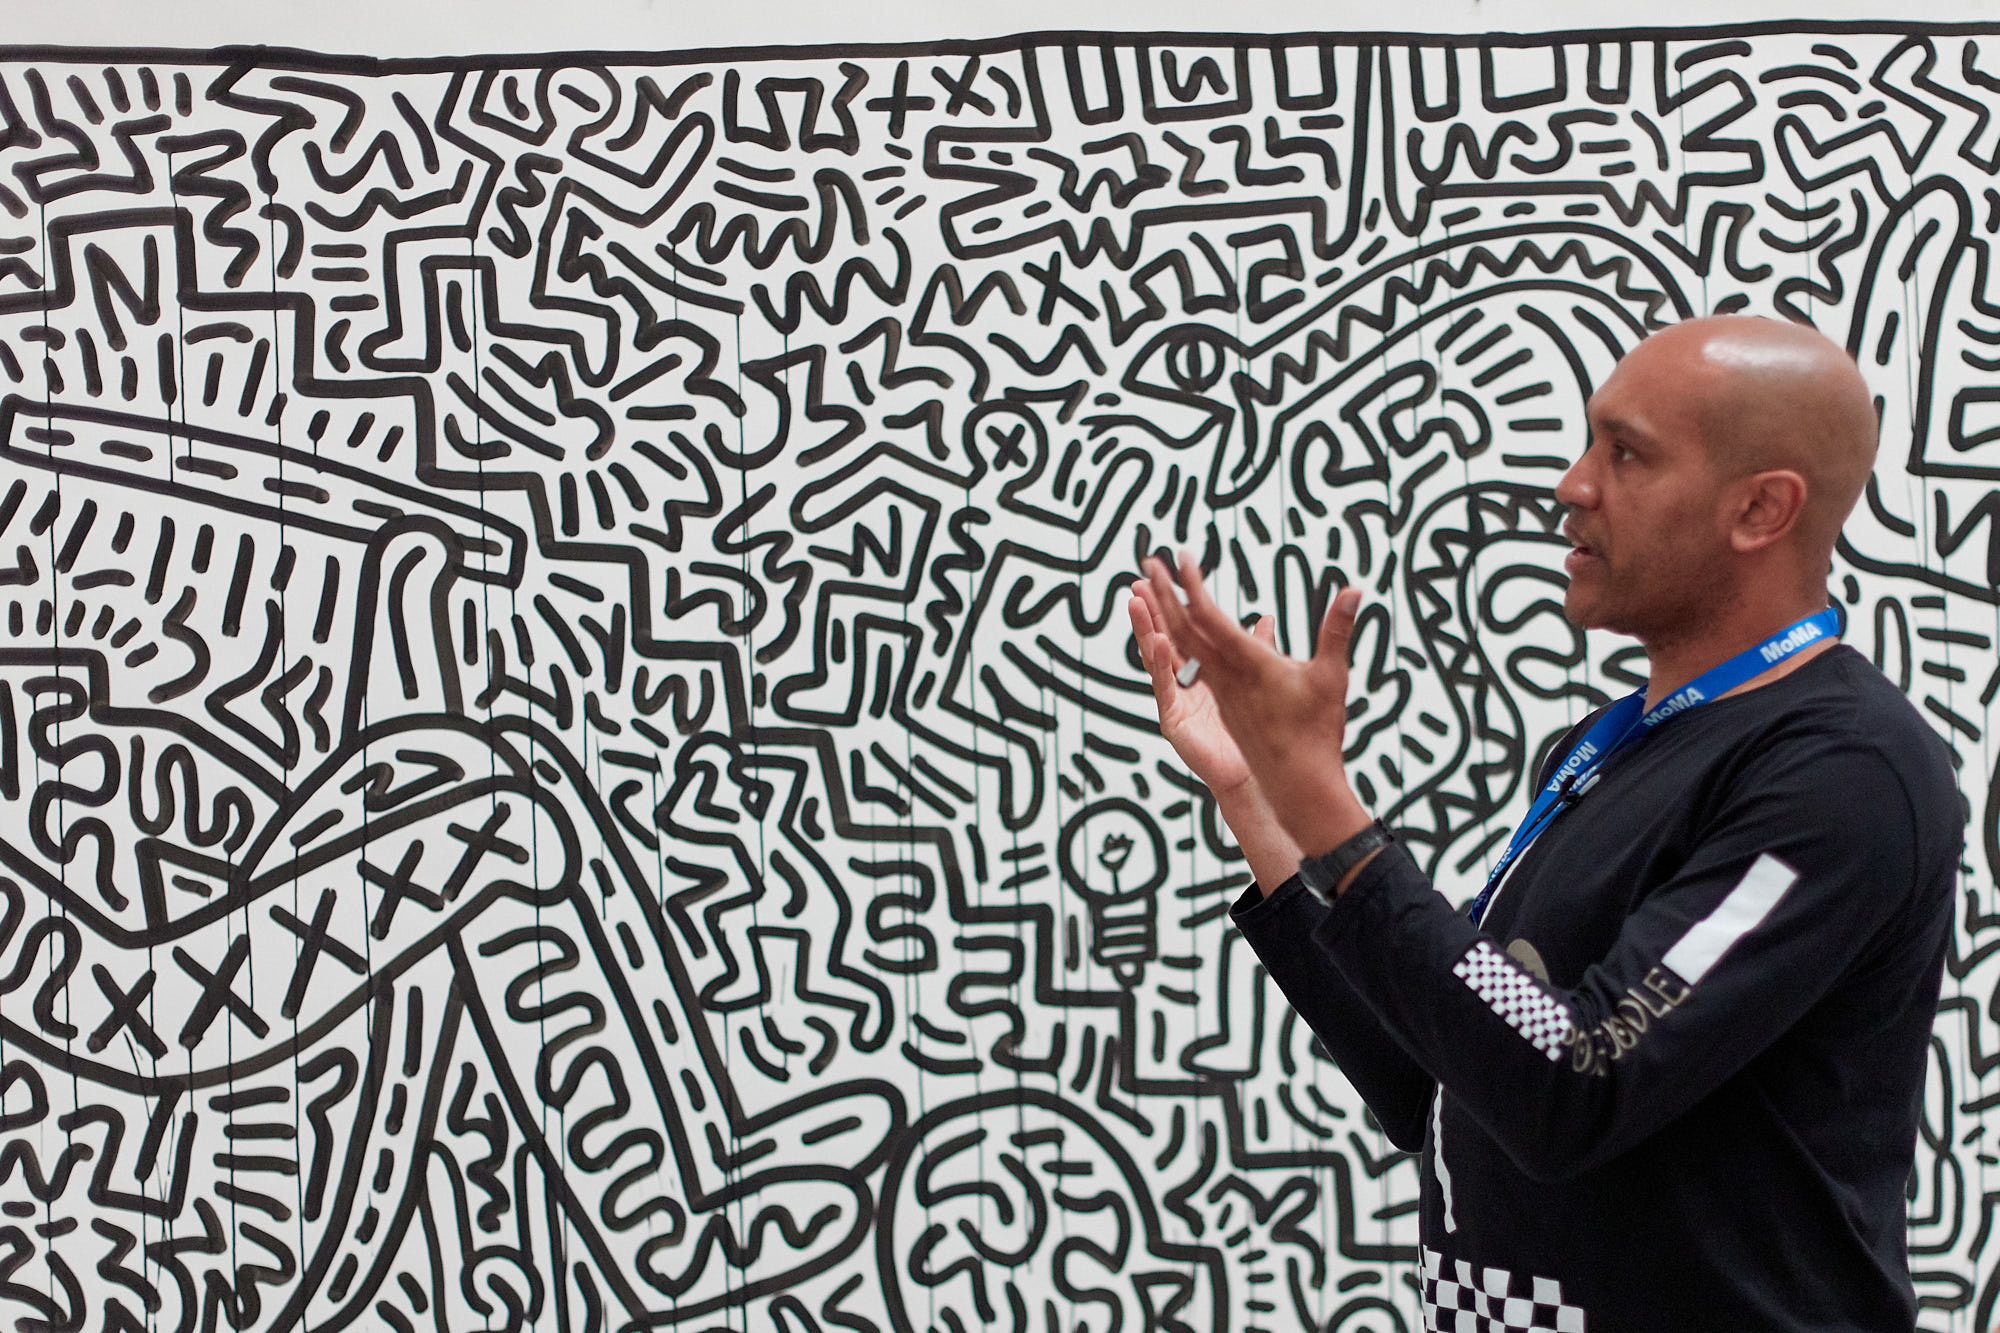 Keith Haring. Untitled. 1982